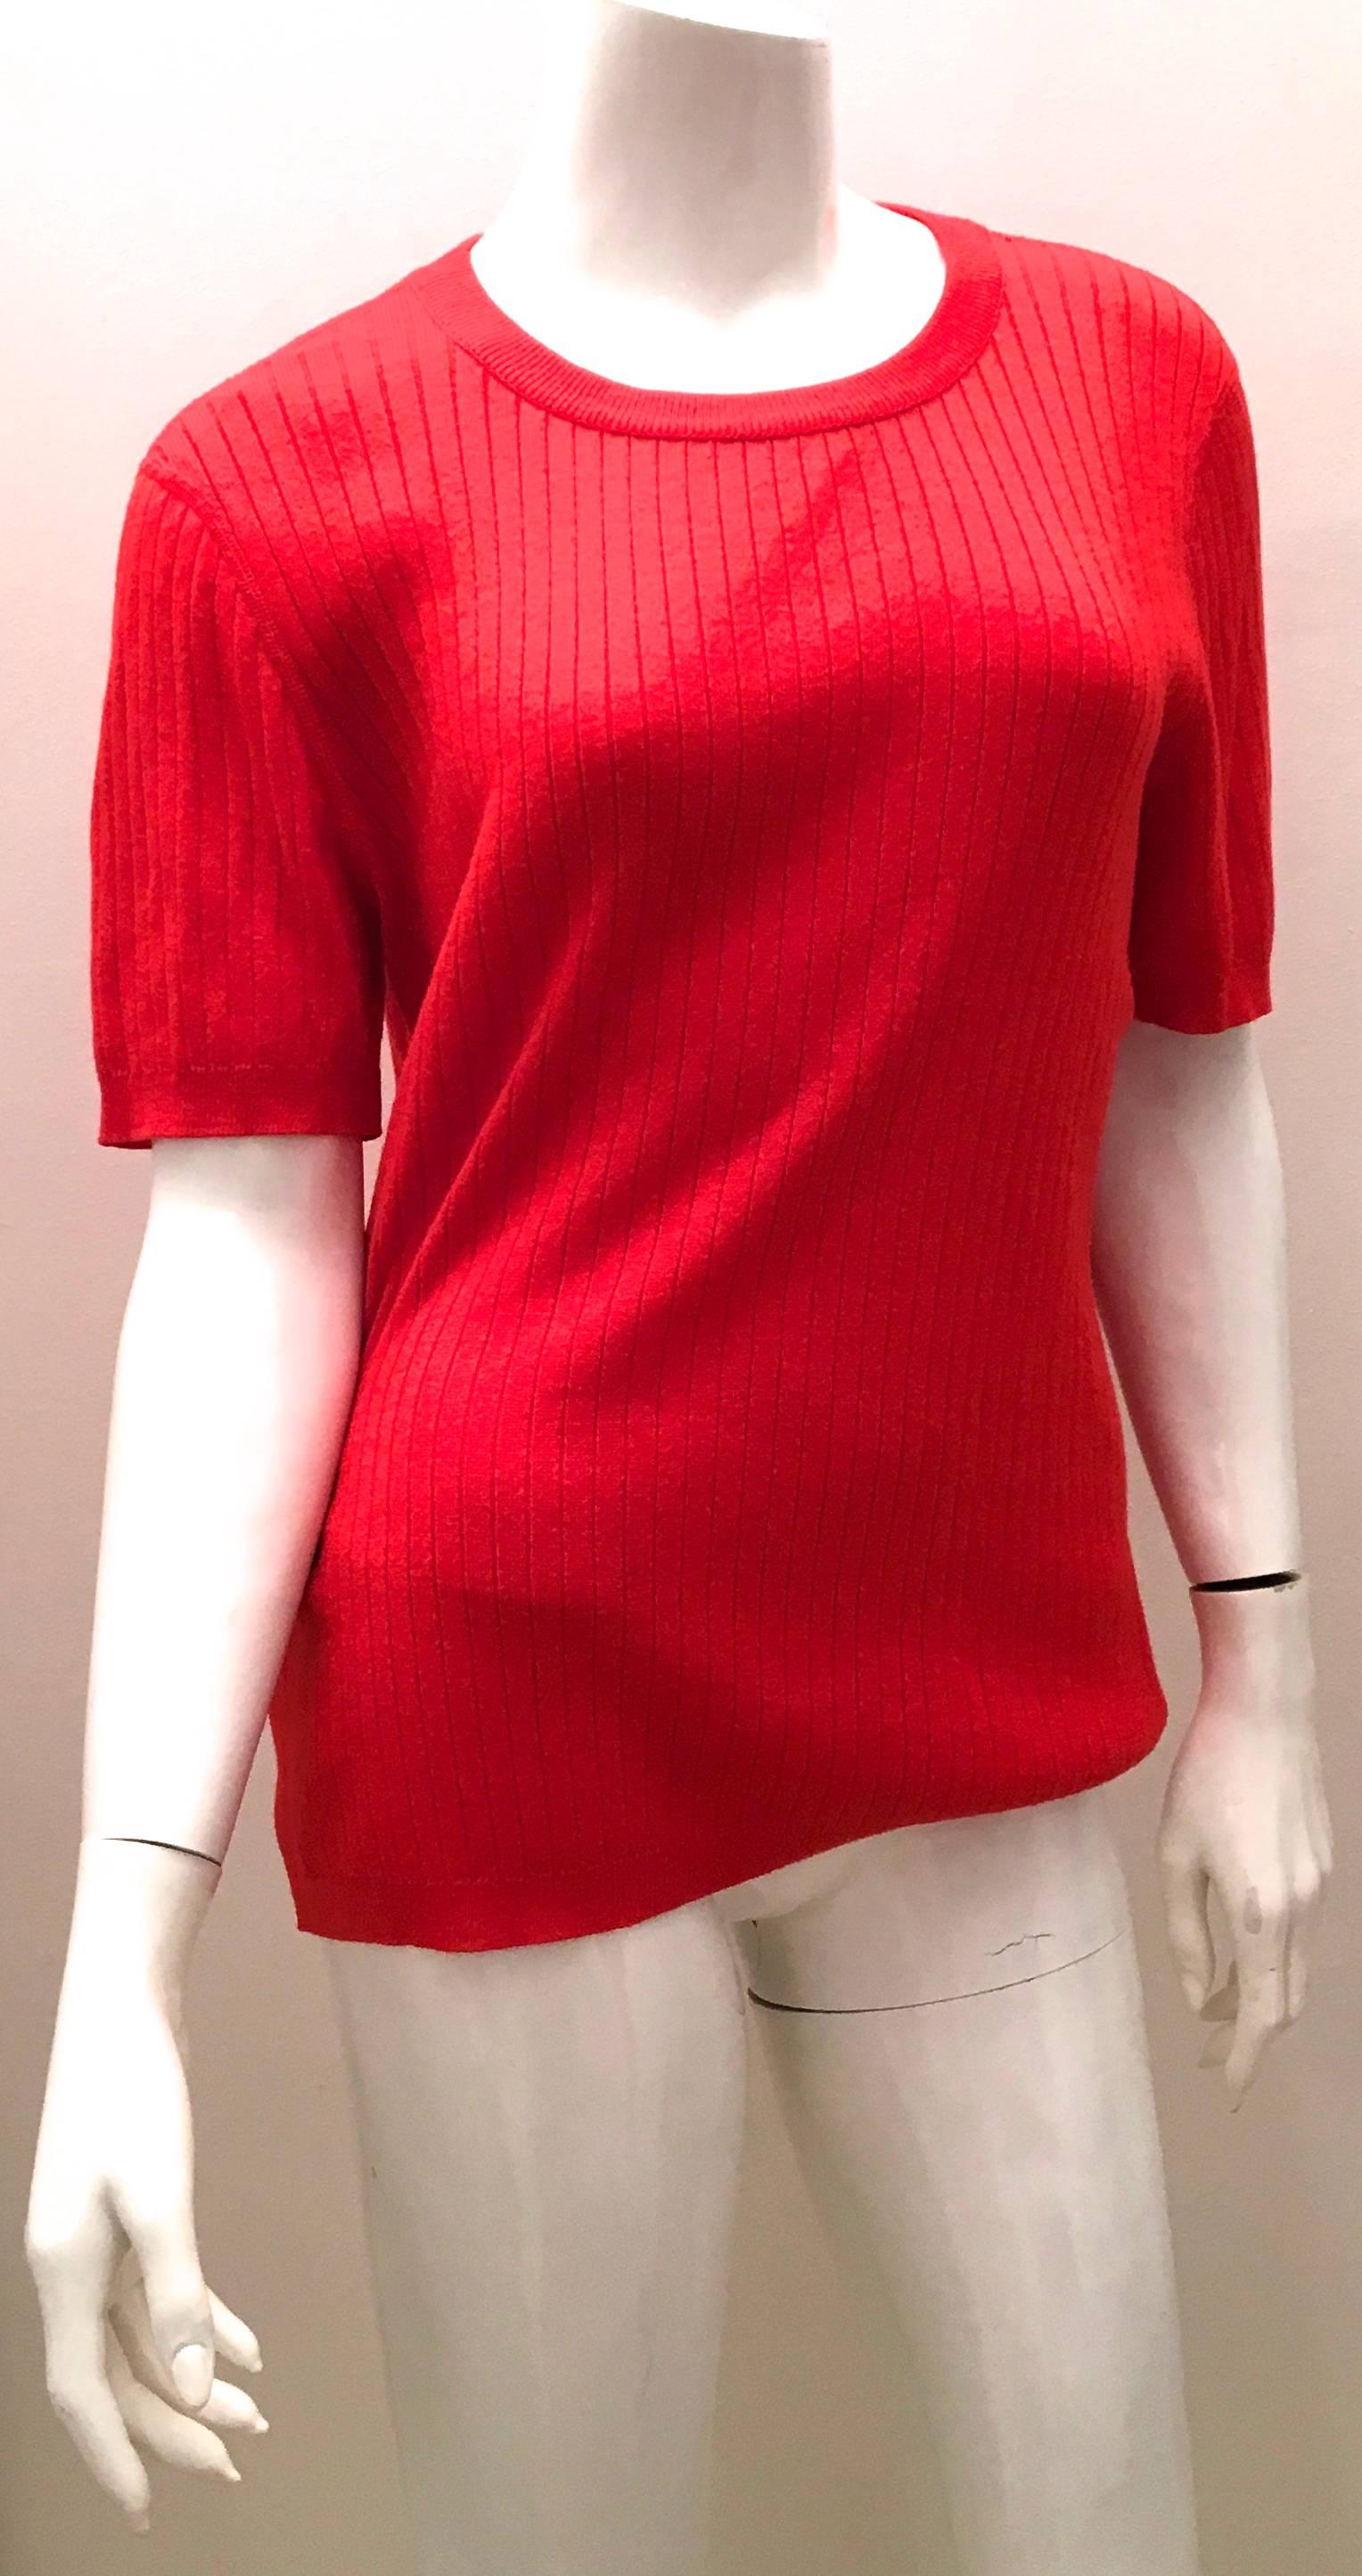 Presented here is a Courreges red cardigan sweater with matching short sleeve sweater. It is from the late 1960's / early 1970's. The cardigan is a v-neck cut and buttons down the front. It is from My guess is it would fit about a size 8 - 12. The